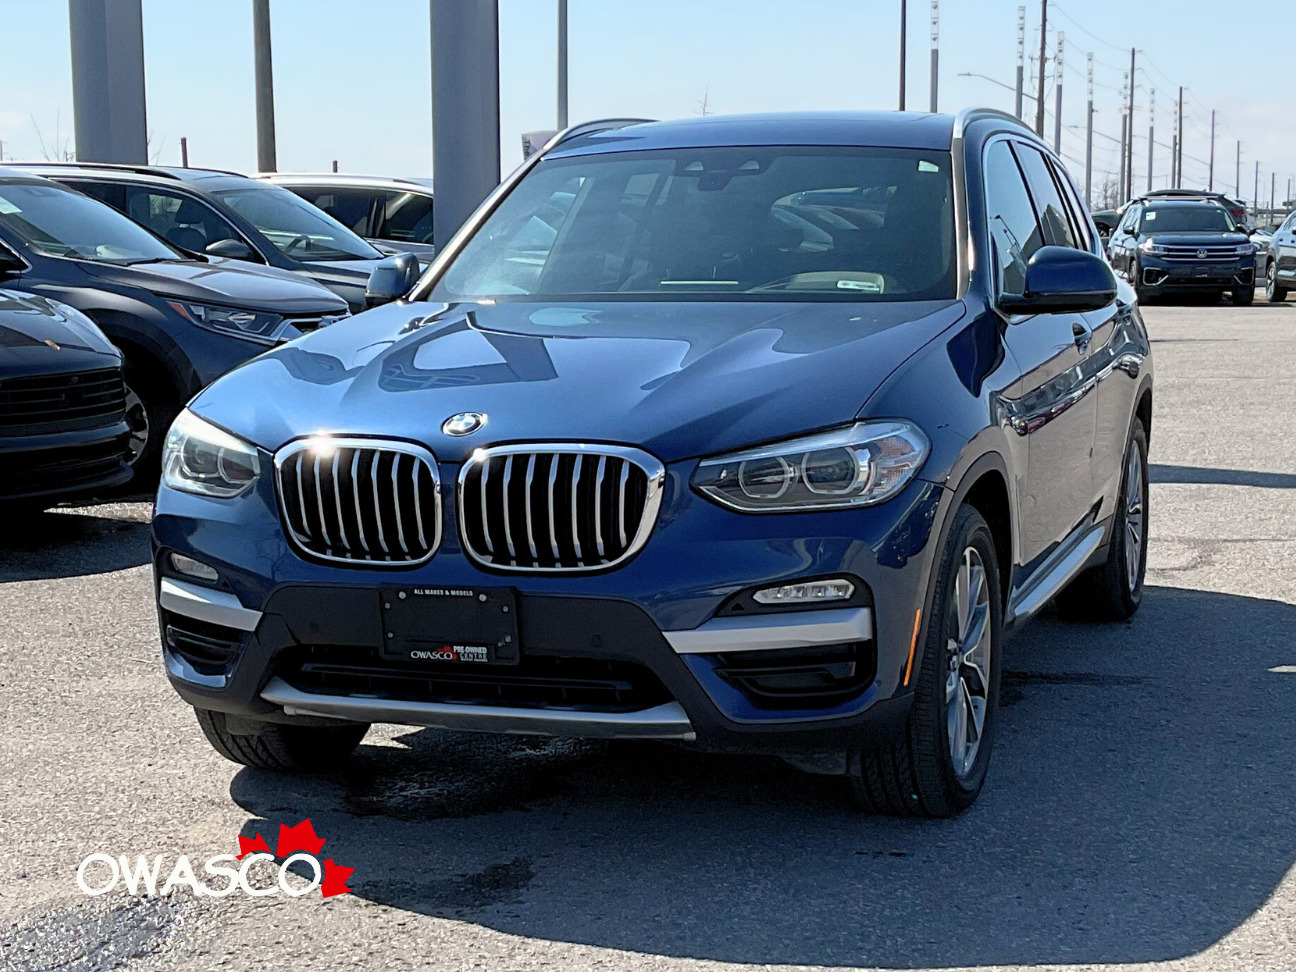 2019 BMW X3 2.0L xDrive! Clean CarFax! Safety Included!